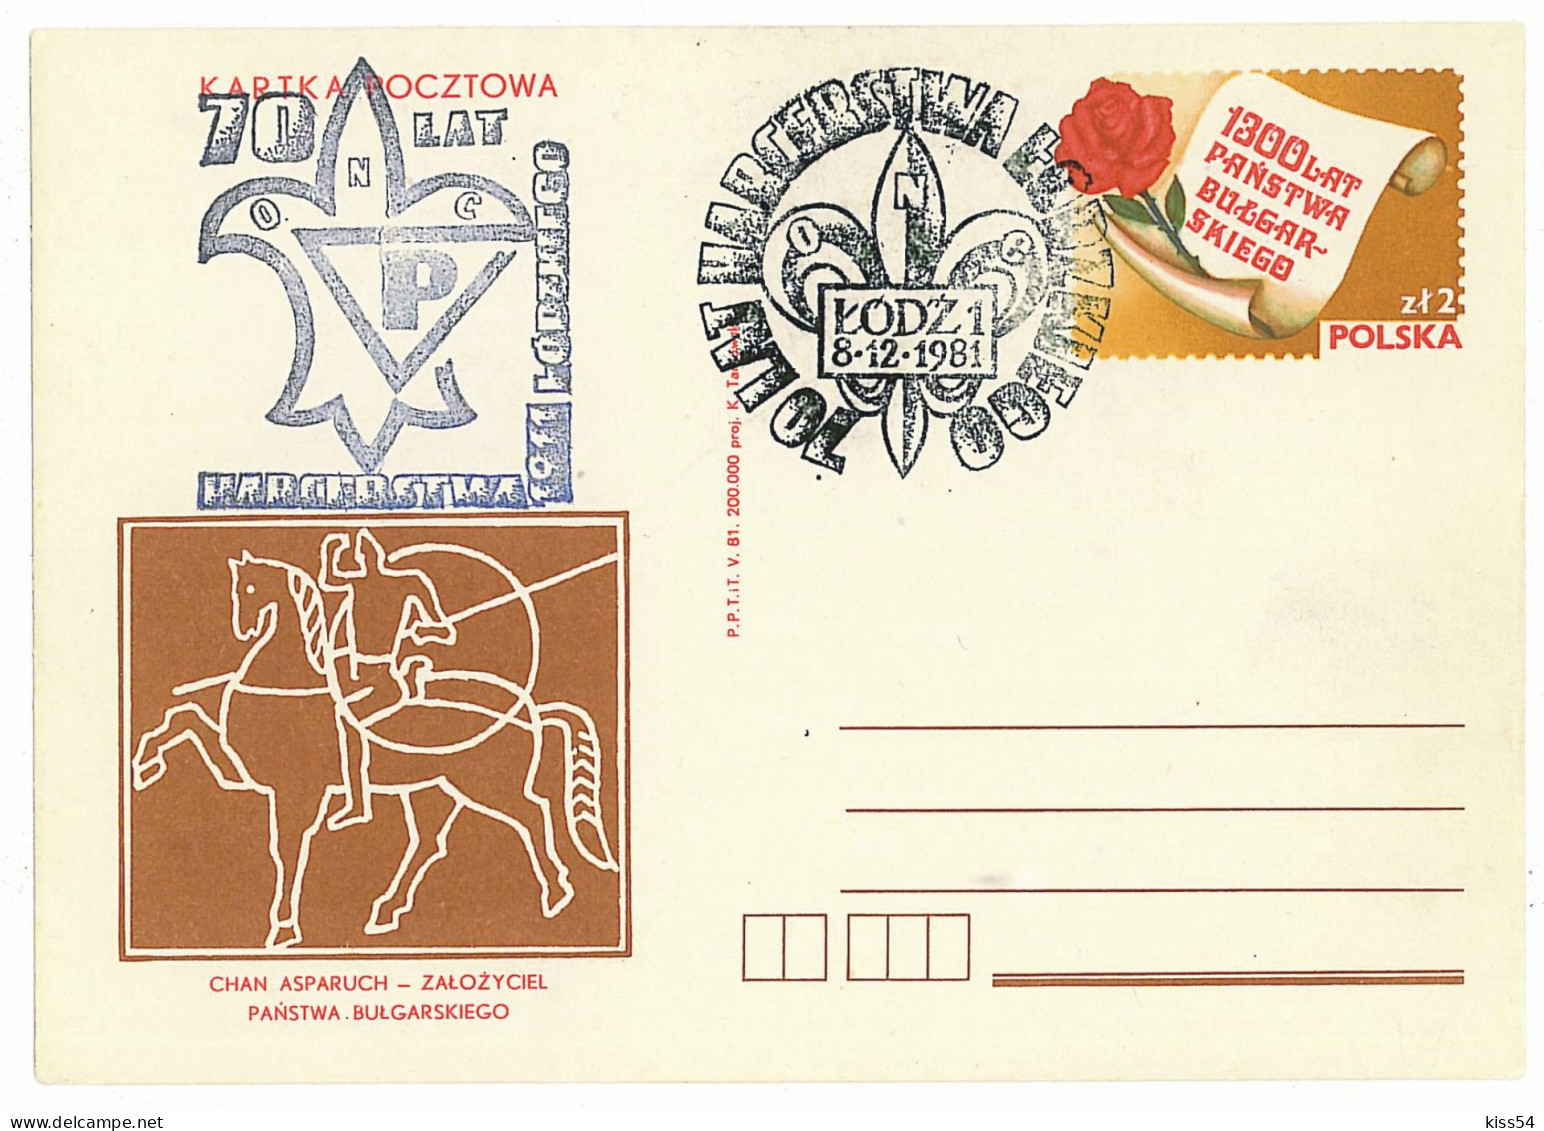 SC 25 - 908 Scout POLAND - Cover Stationery - Used - 1981 - Storia Postale